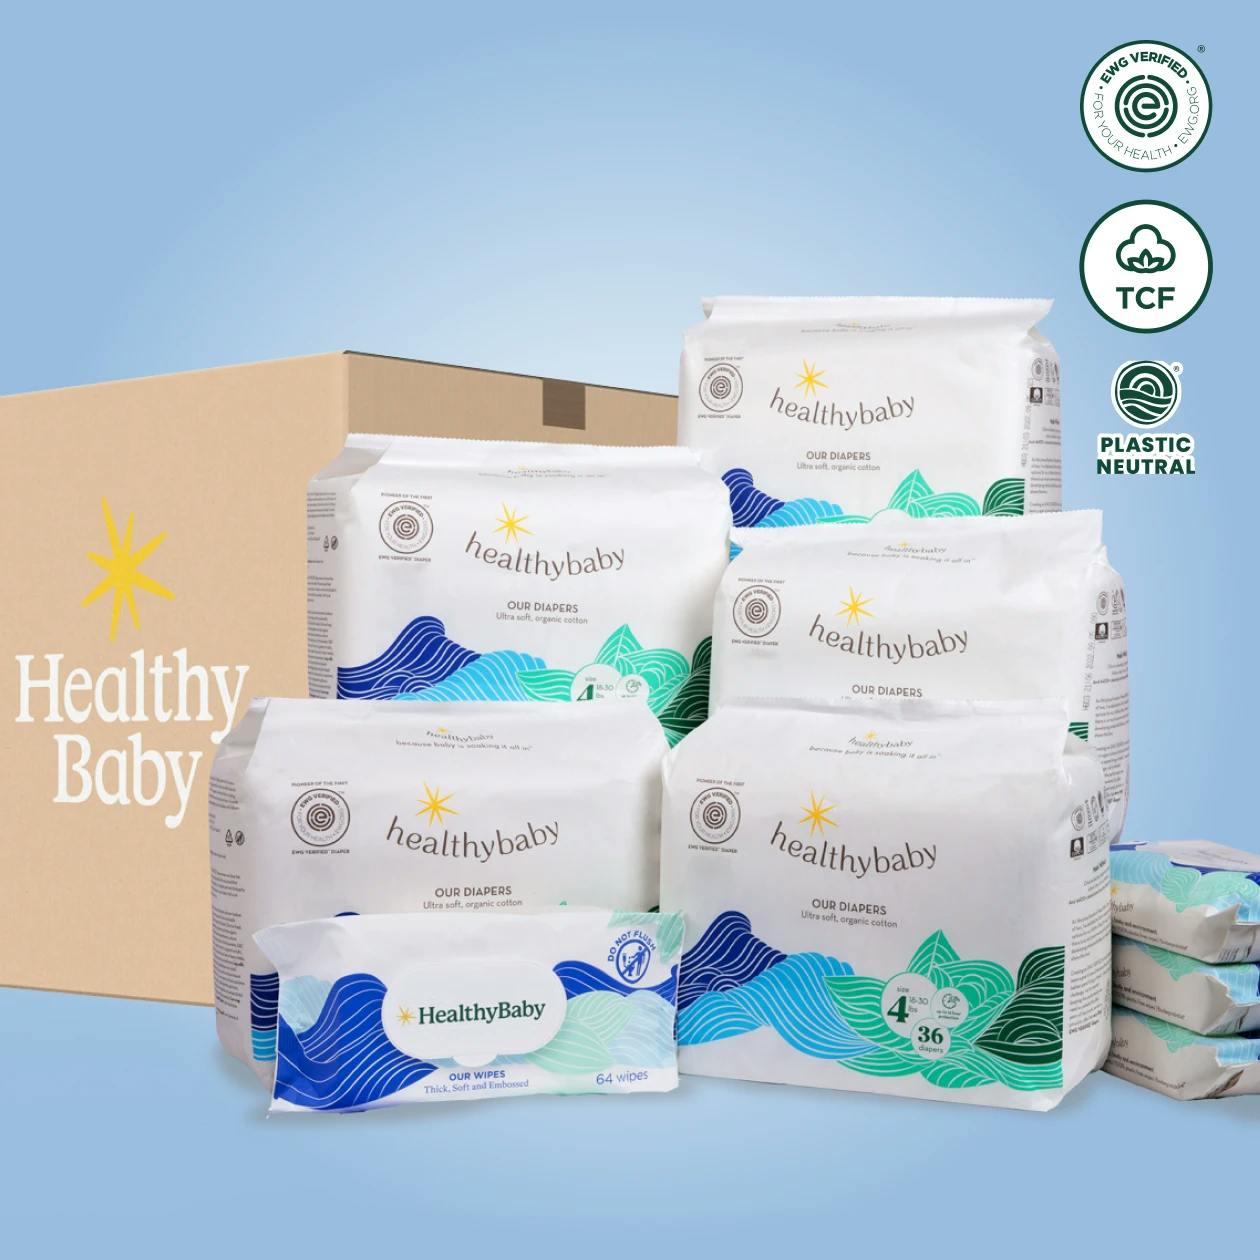 Everything You Ever Wanted to Know About Plastic-Free Diapers